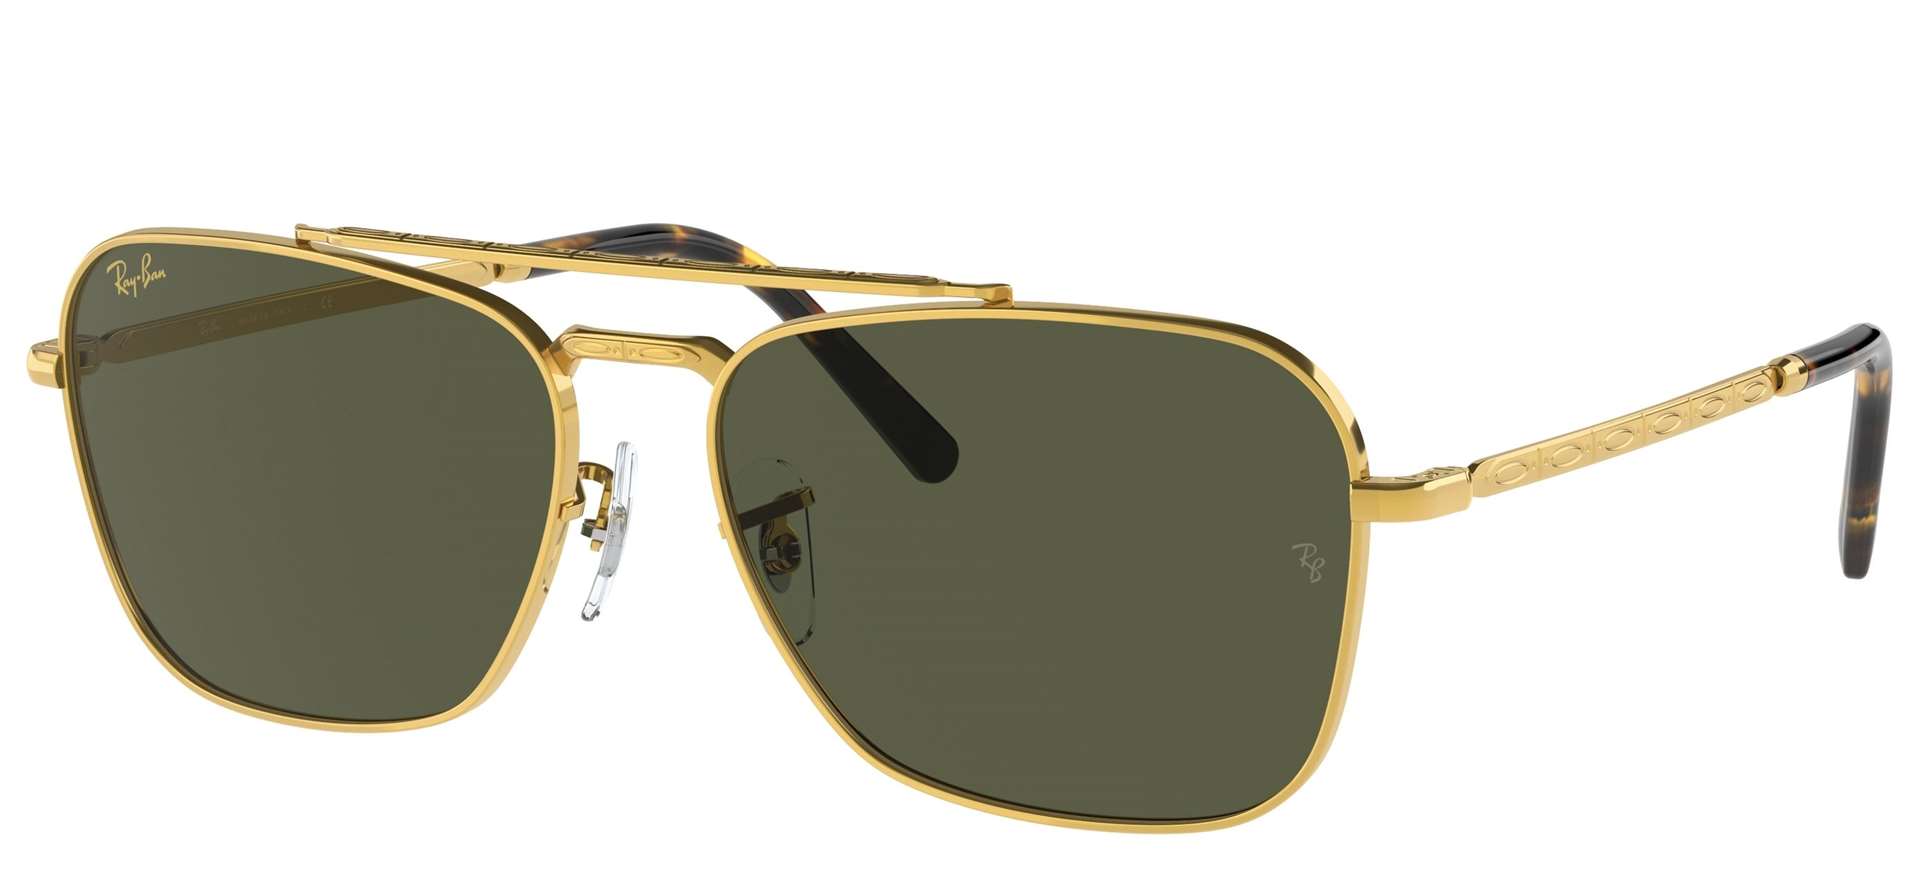 Diana Mikova stole a pair of Ray-Ban sunglasses from a car parked on a couple's driveway in Margate. Stock picture